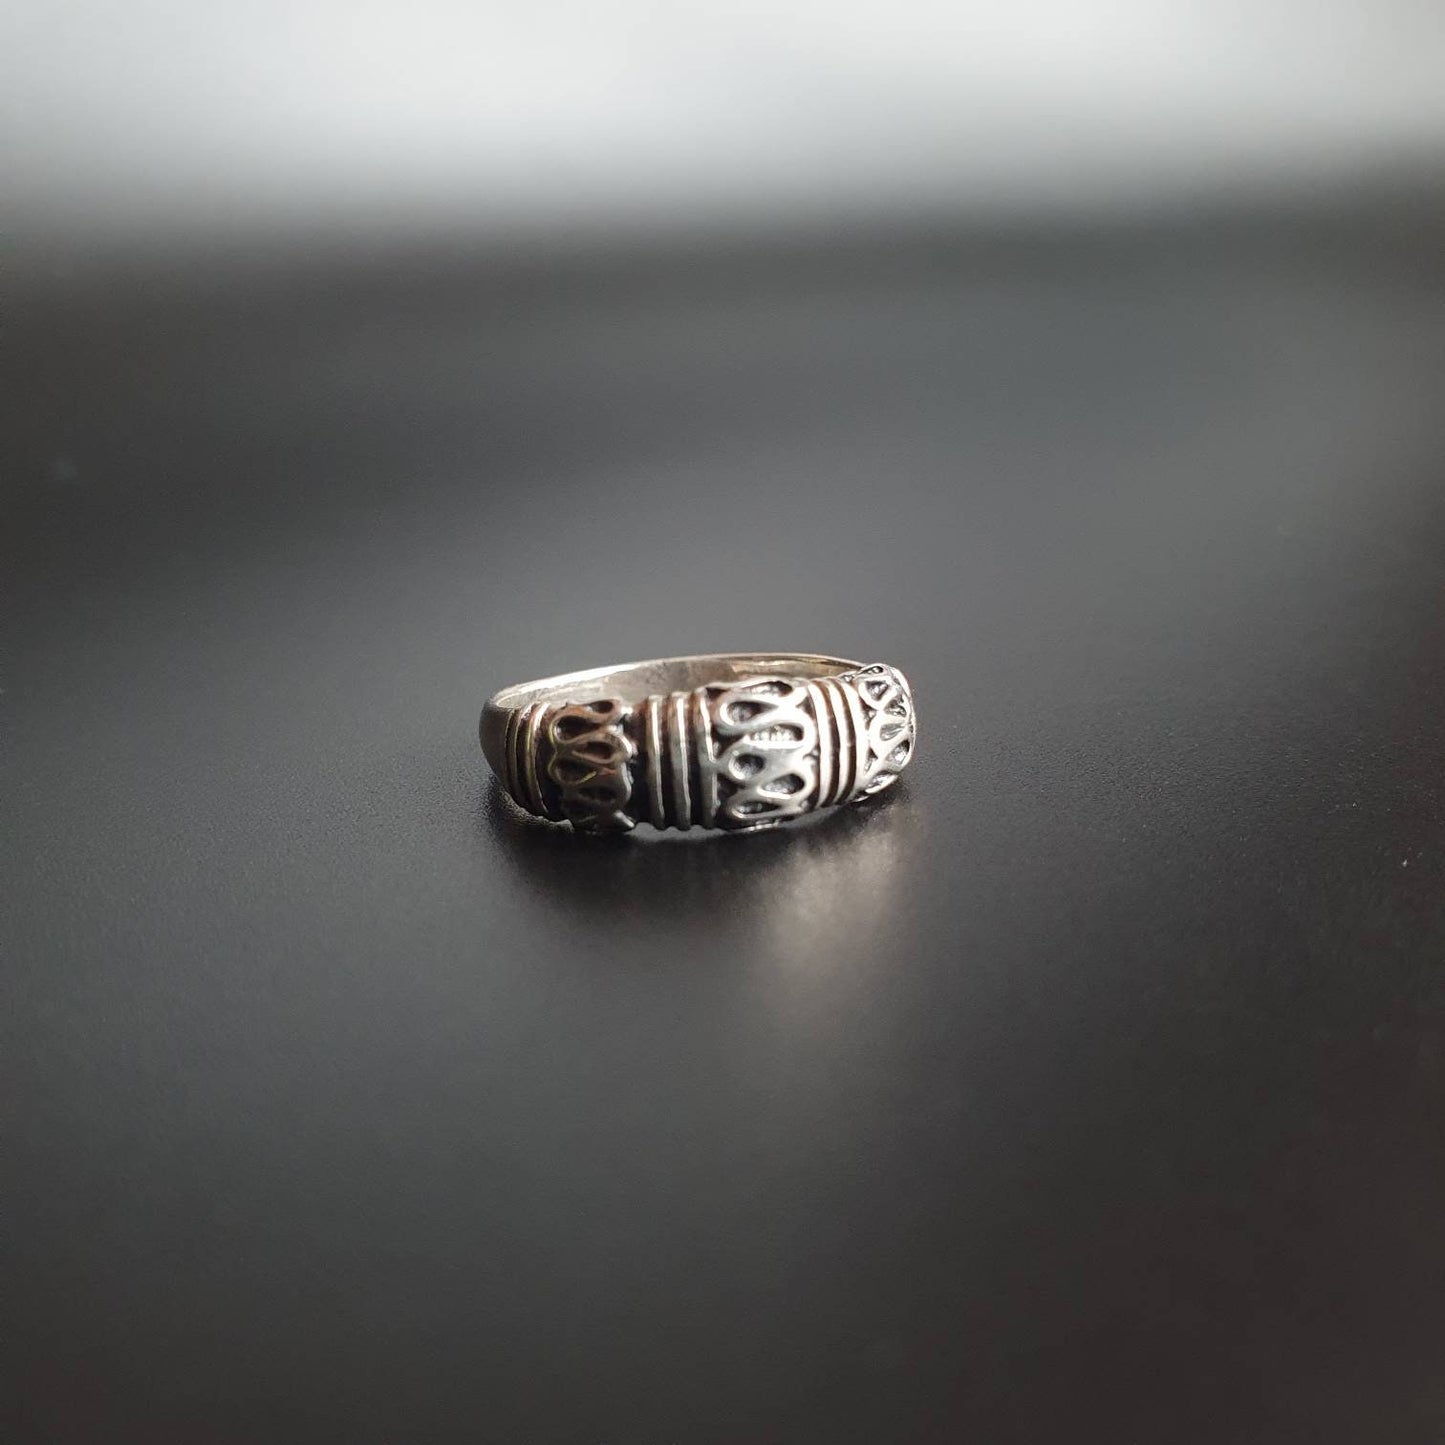 Silver ring, sterling silver jewelry,Stackable rings, statement ring, suarti ring, bohemian jewelry, gothic Ring, tribal jewelry, 925 gifts